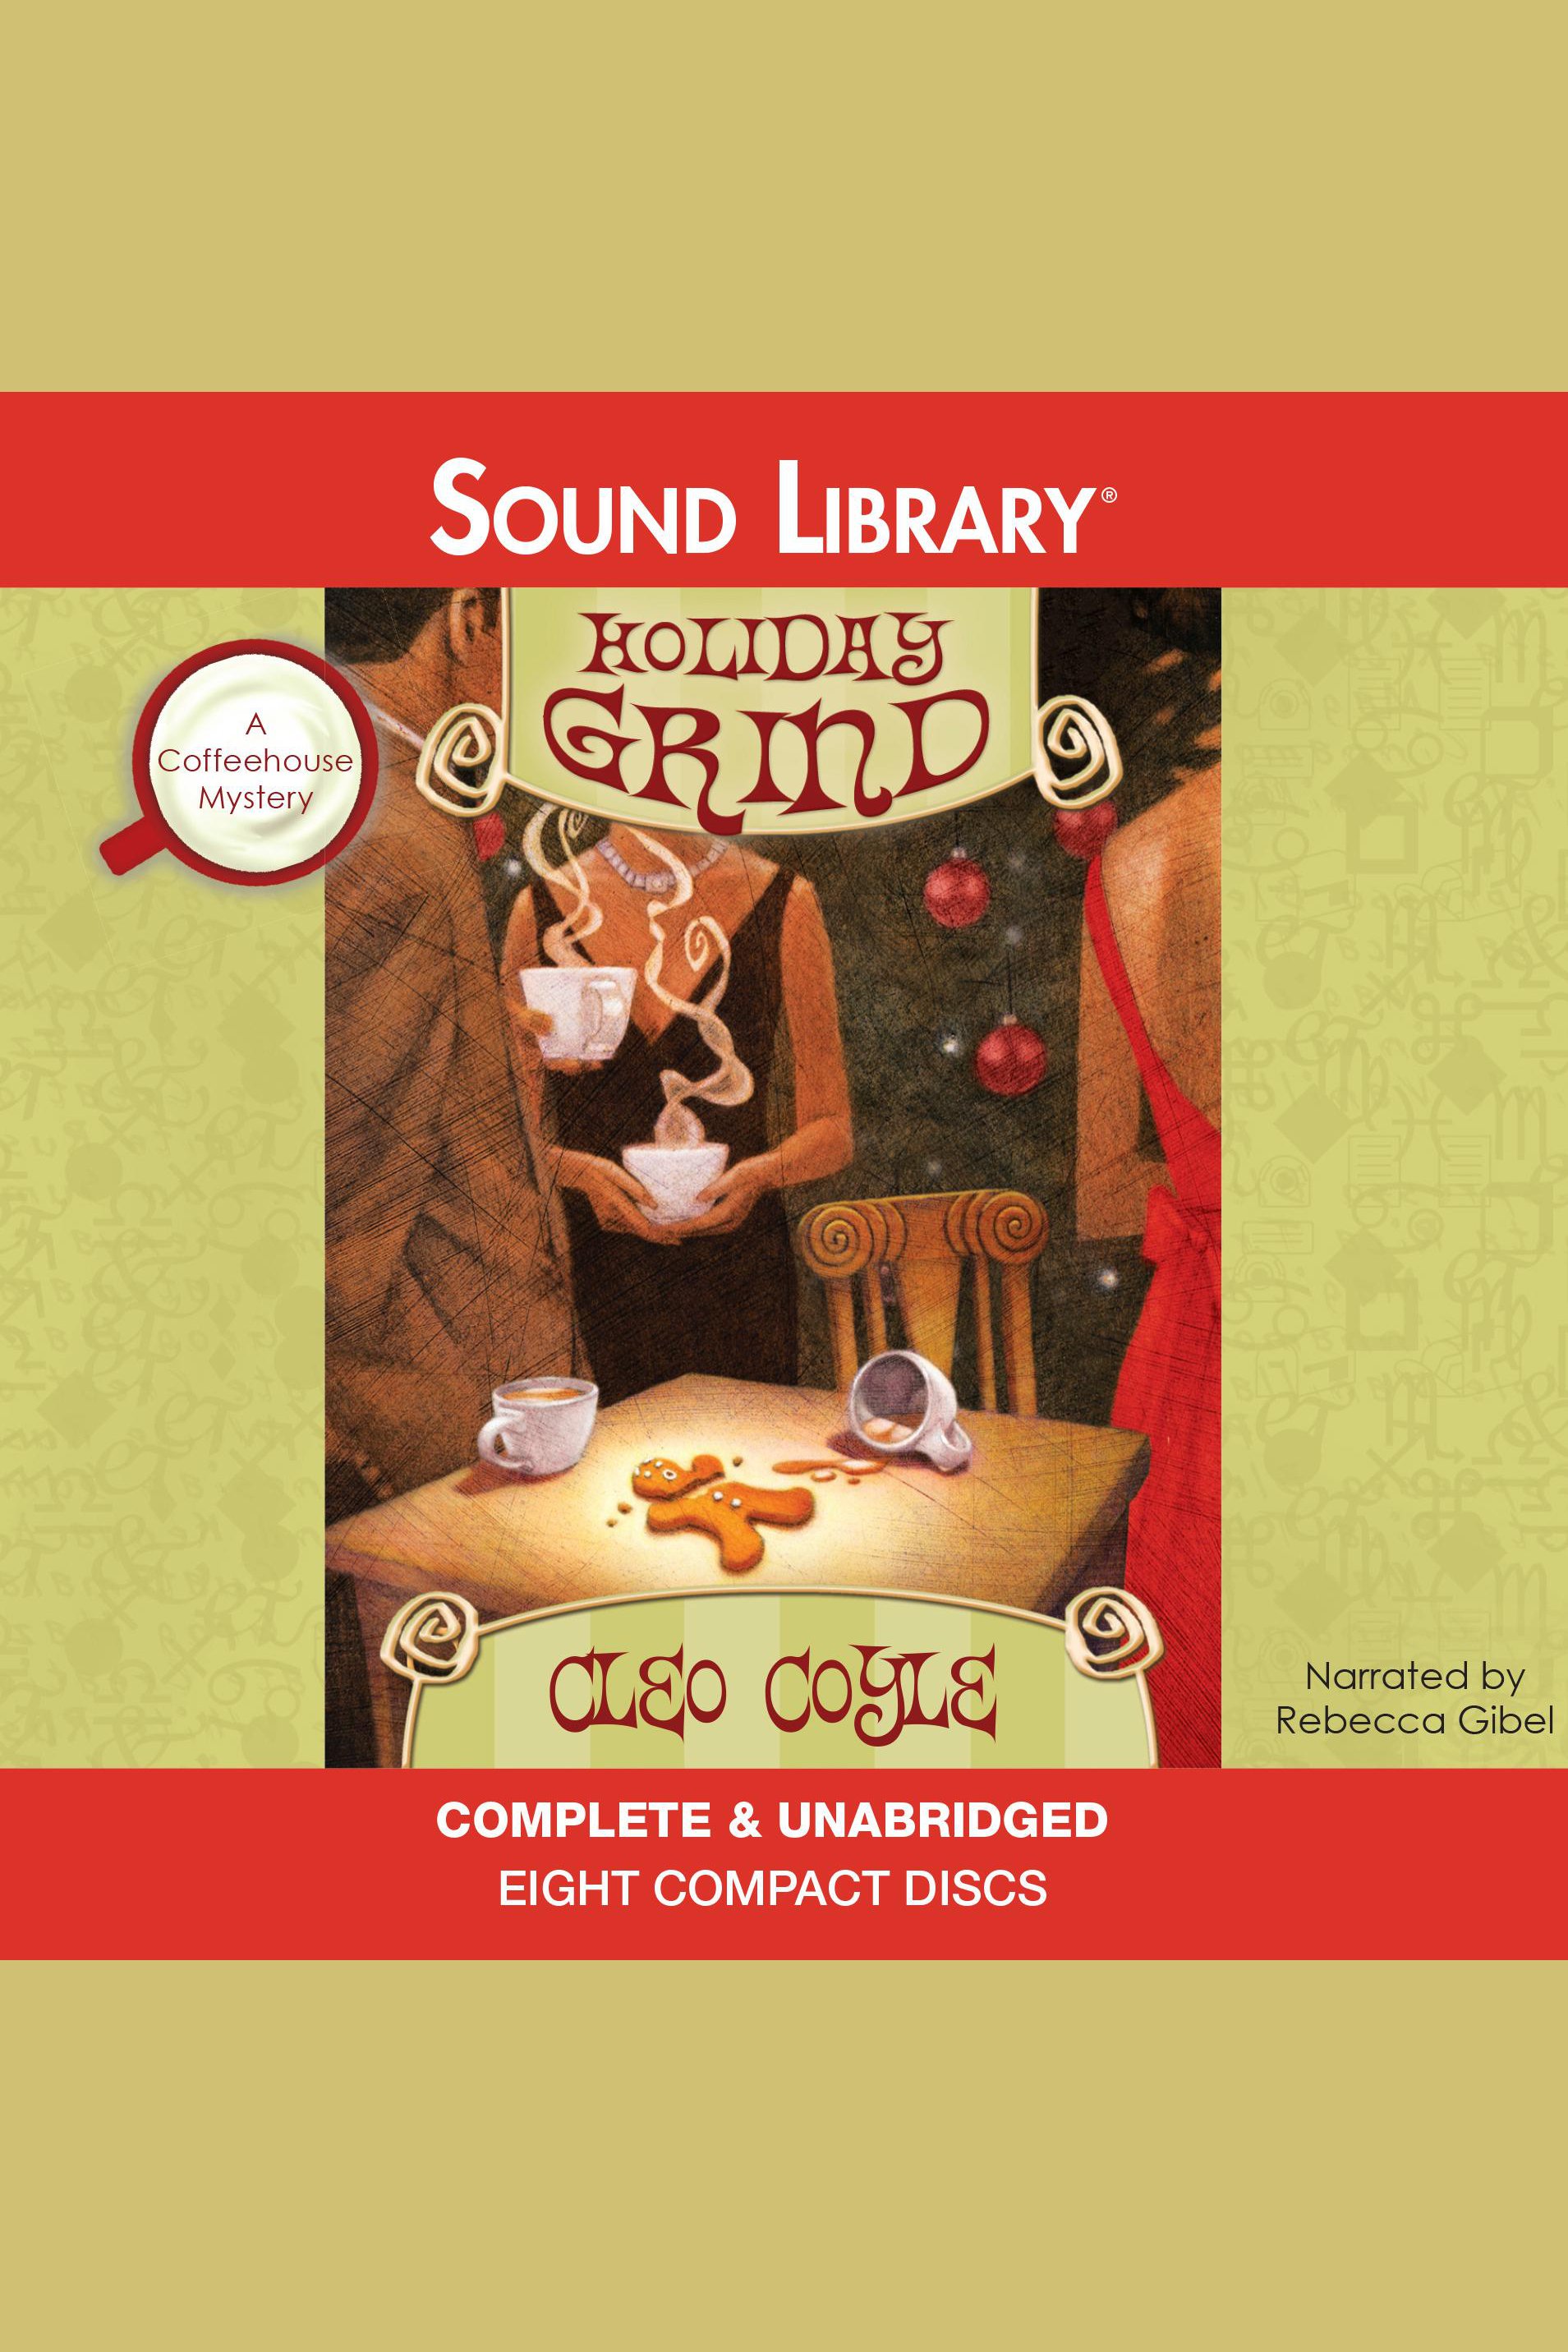 Cover image for Holiday Grind [electronic resource] : A Coffeehouse Mystery, Book 8